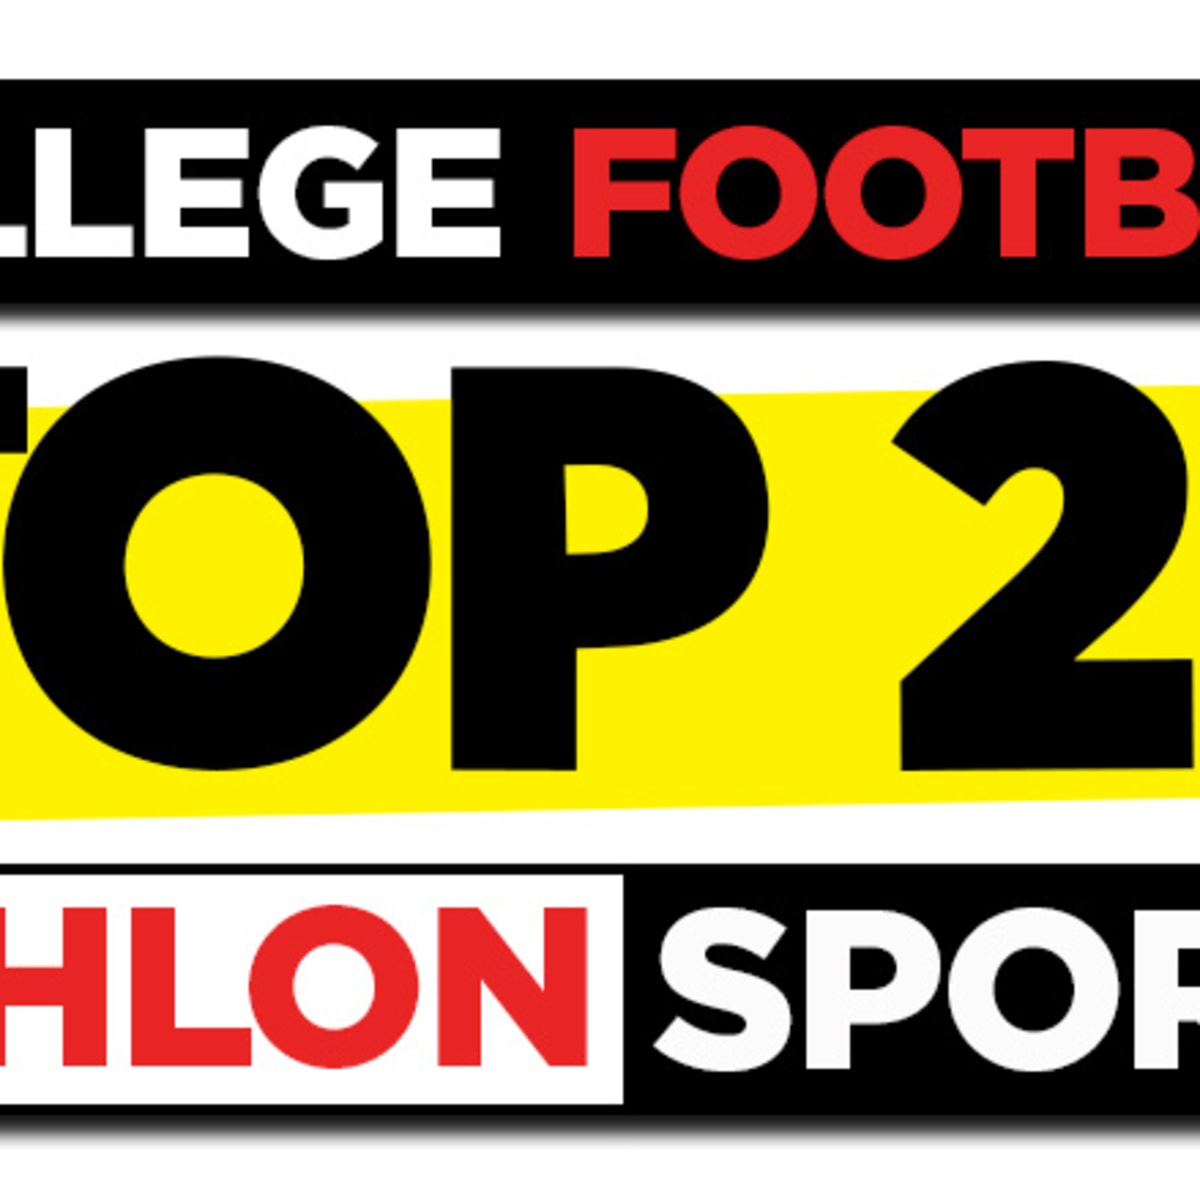 Way-Too-Early Top 25 College Football Rankings for - AthlonSports.com | Expert Predictions, Picks, Previews